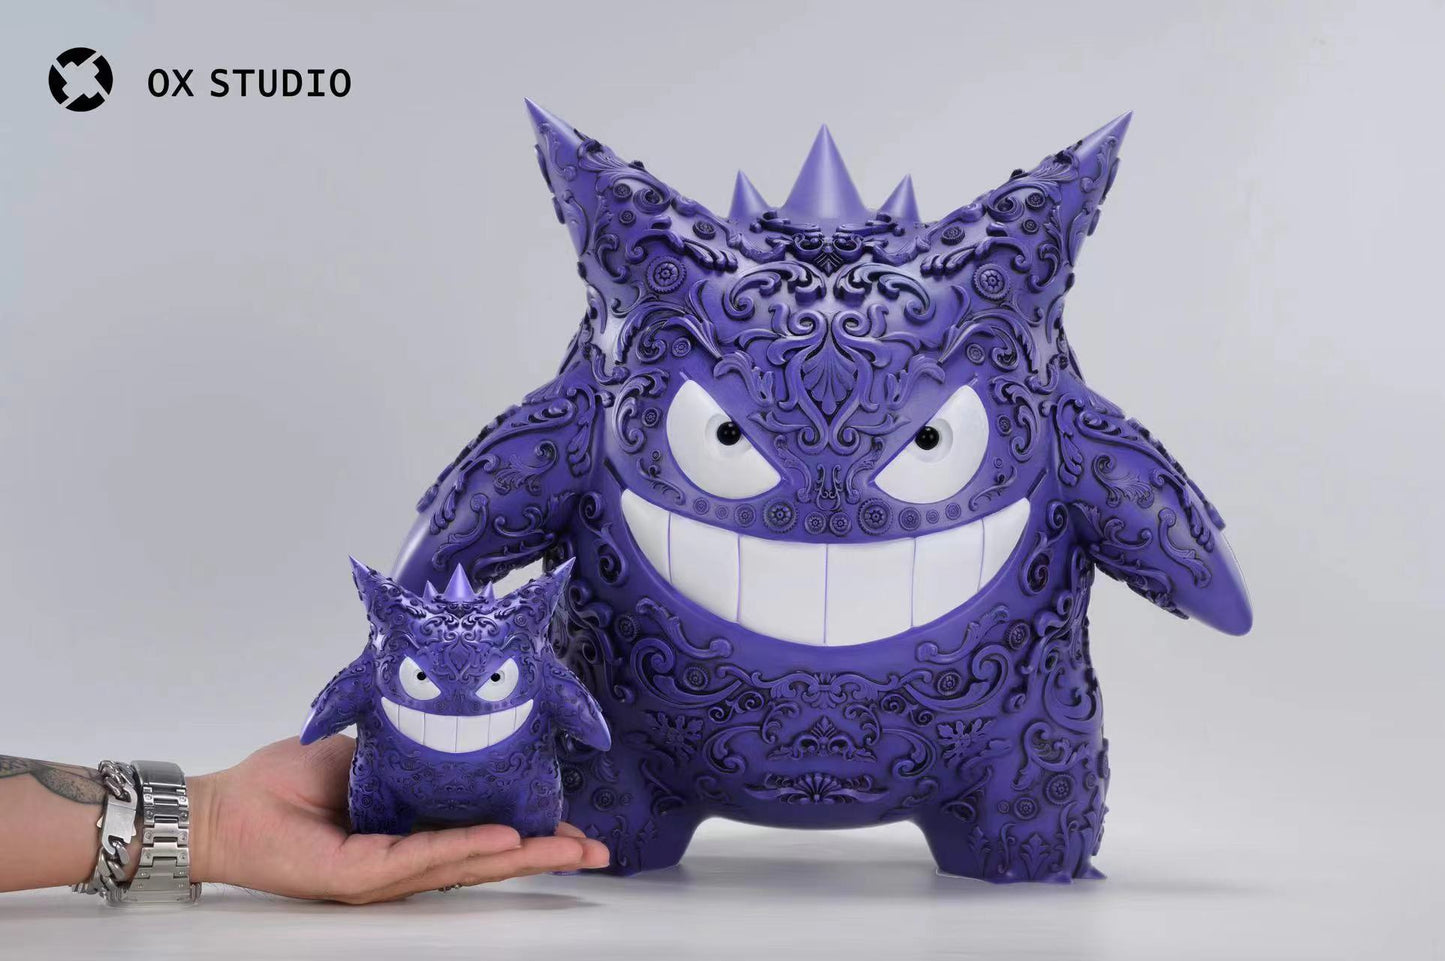 〖Sold Out〗Pokémon Peripheral Products Gengar - OX Studio